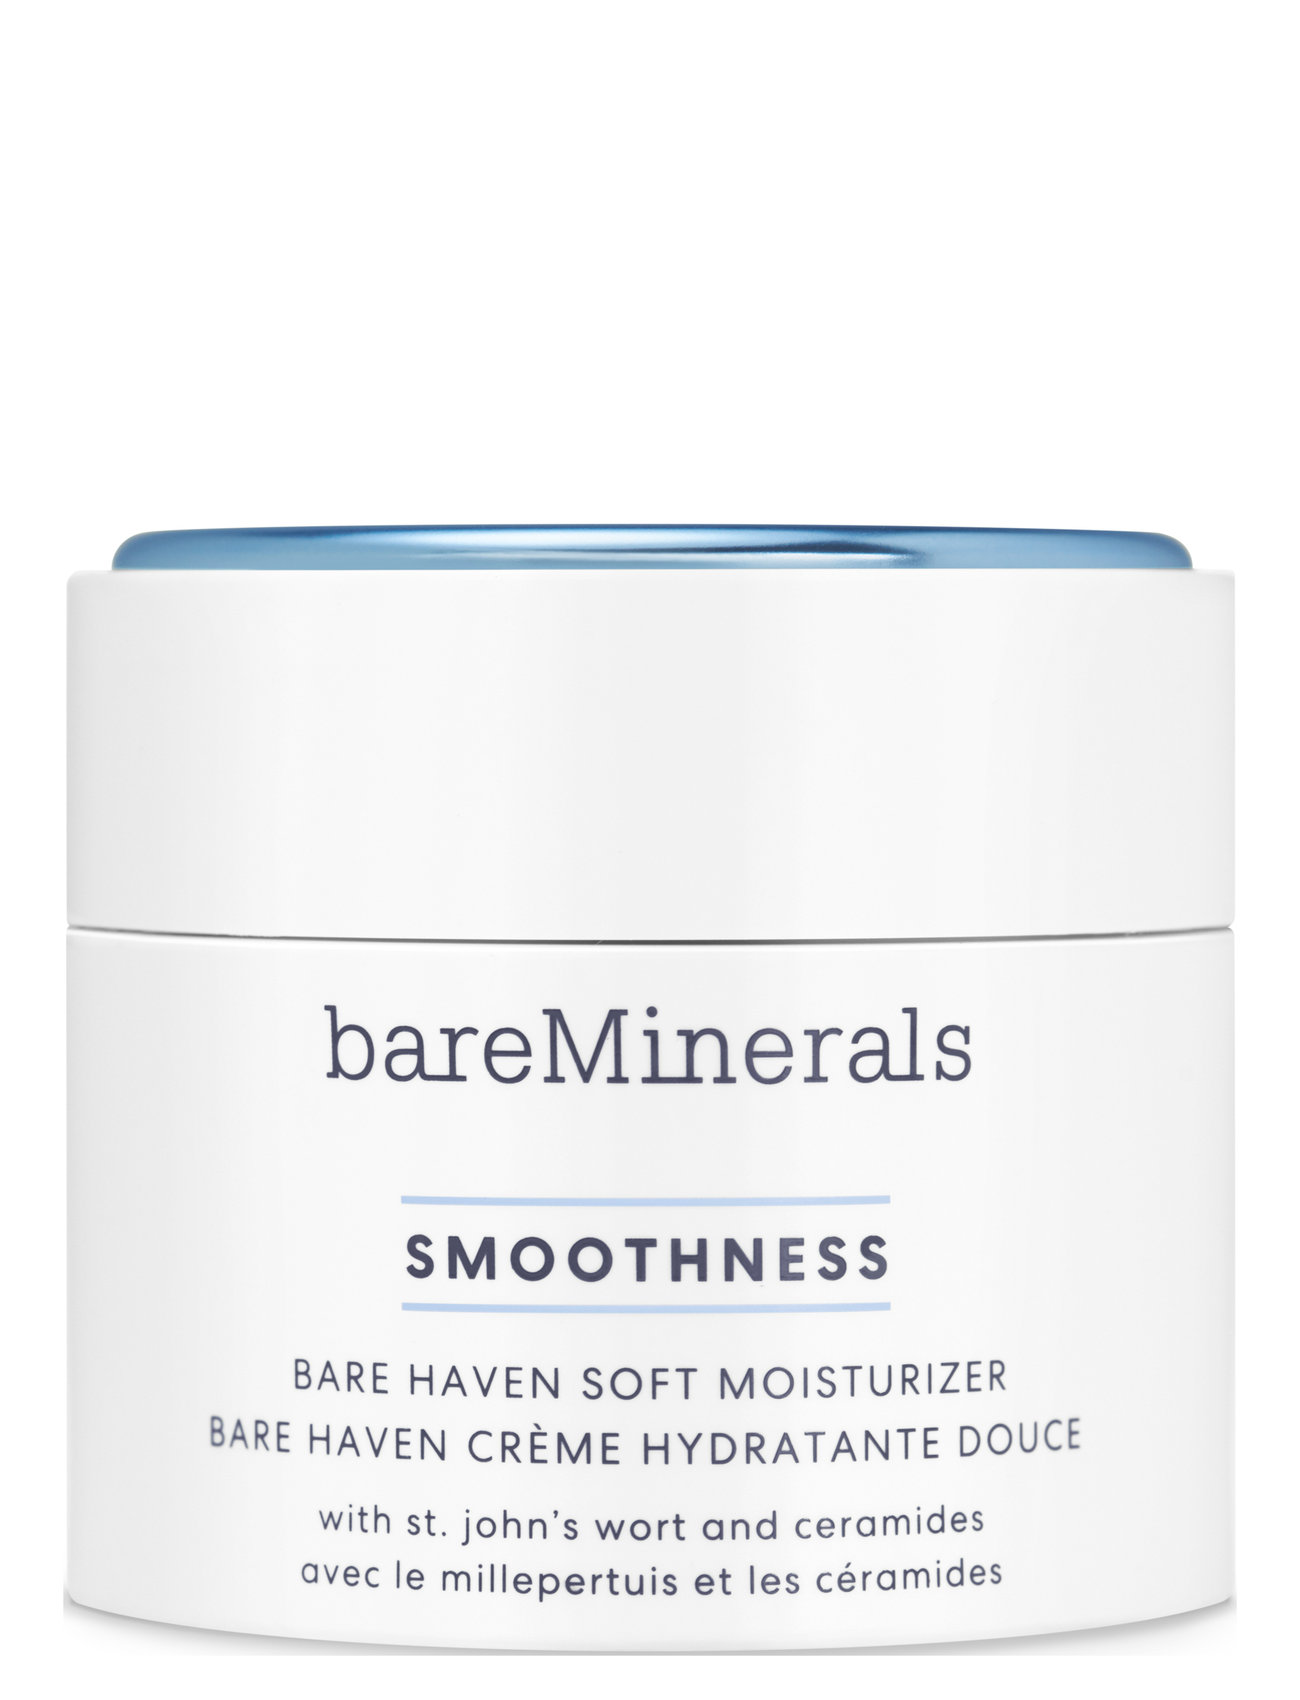 Smoothness Bare Haven Soft Moisturizer Beauty WOMEN Skin Care Face Day Creams Nude BareMinerals, bareMinerals